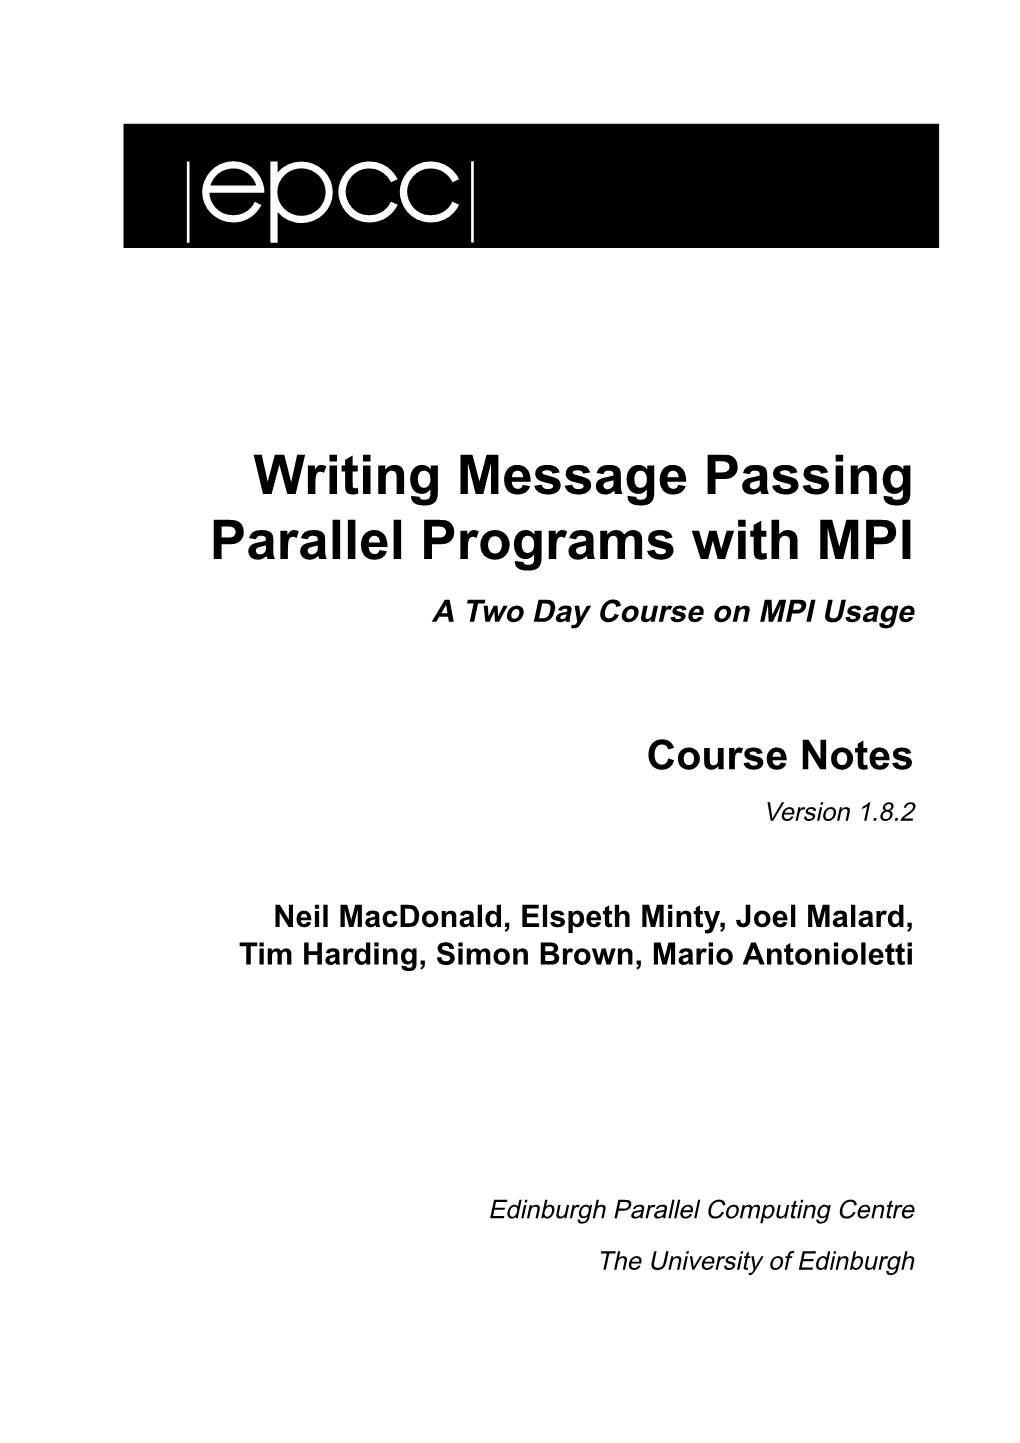 Writing Message Passing Parallel Programs with MPI a Two Day Course on MPI Usage